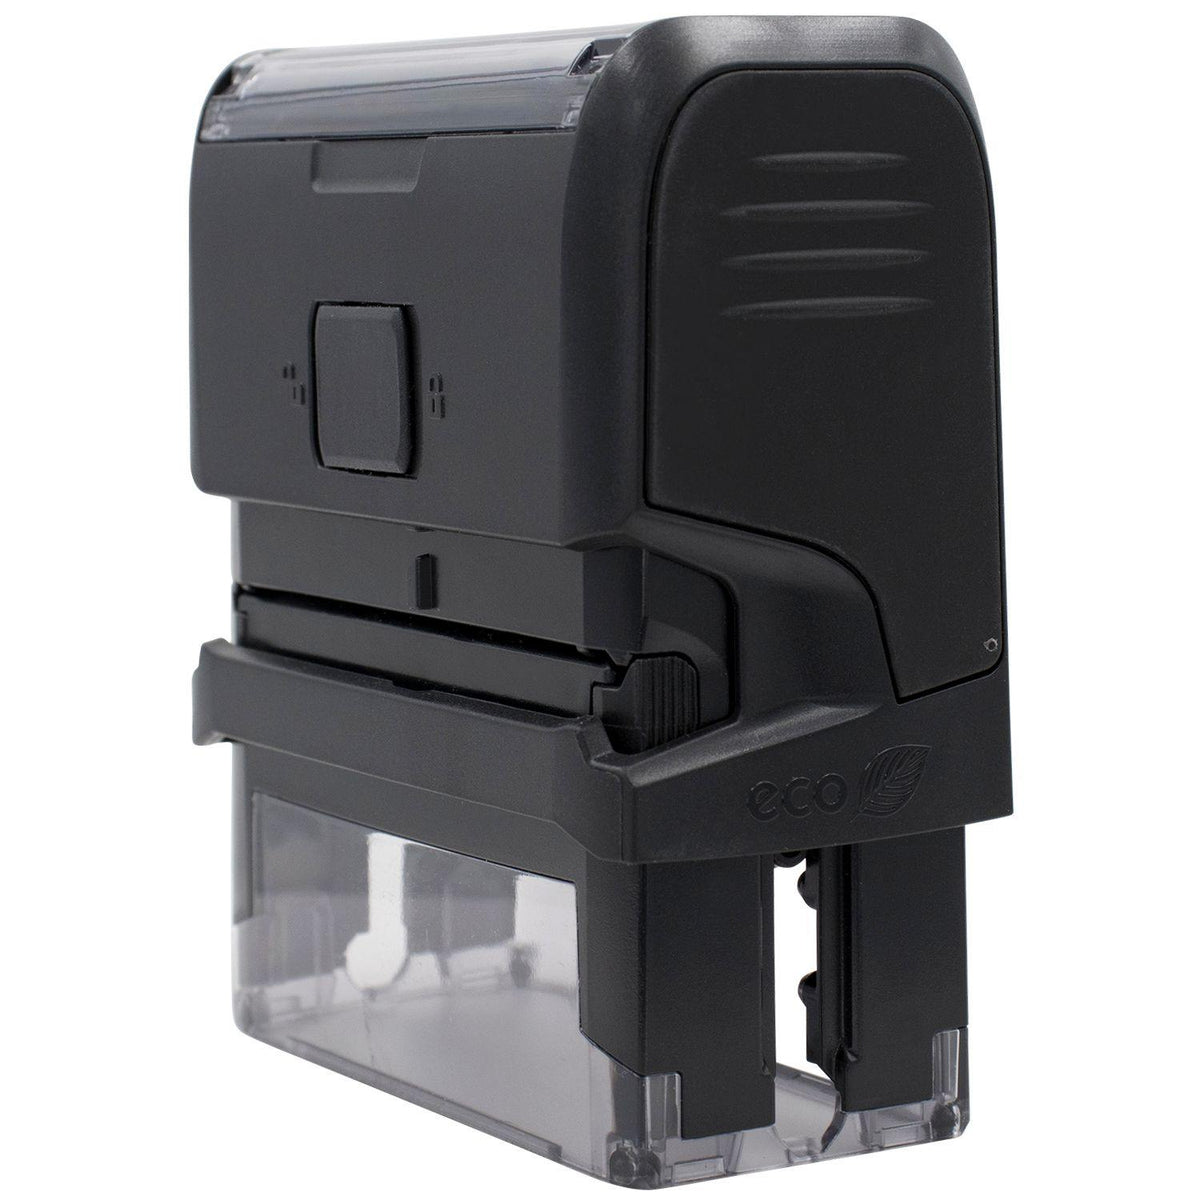 Large Self-Inking Temporarily Away Stamp - Engineer Seal Stamps - Brand_Trodat, Impression Size_Large, Stamp Type_Self-Inking Stamp, Type of Use_Postal &amp; Mailing